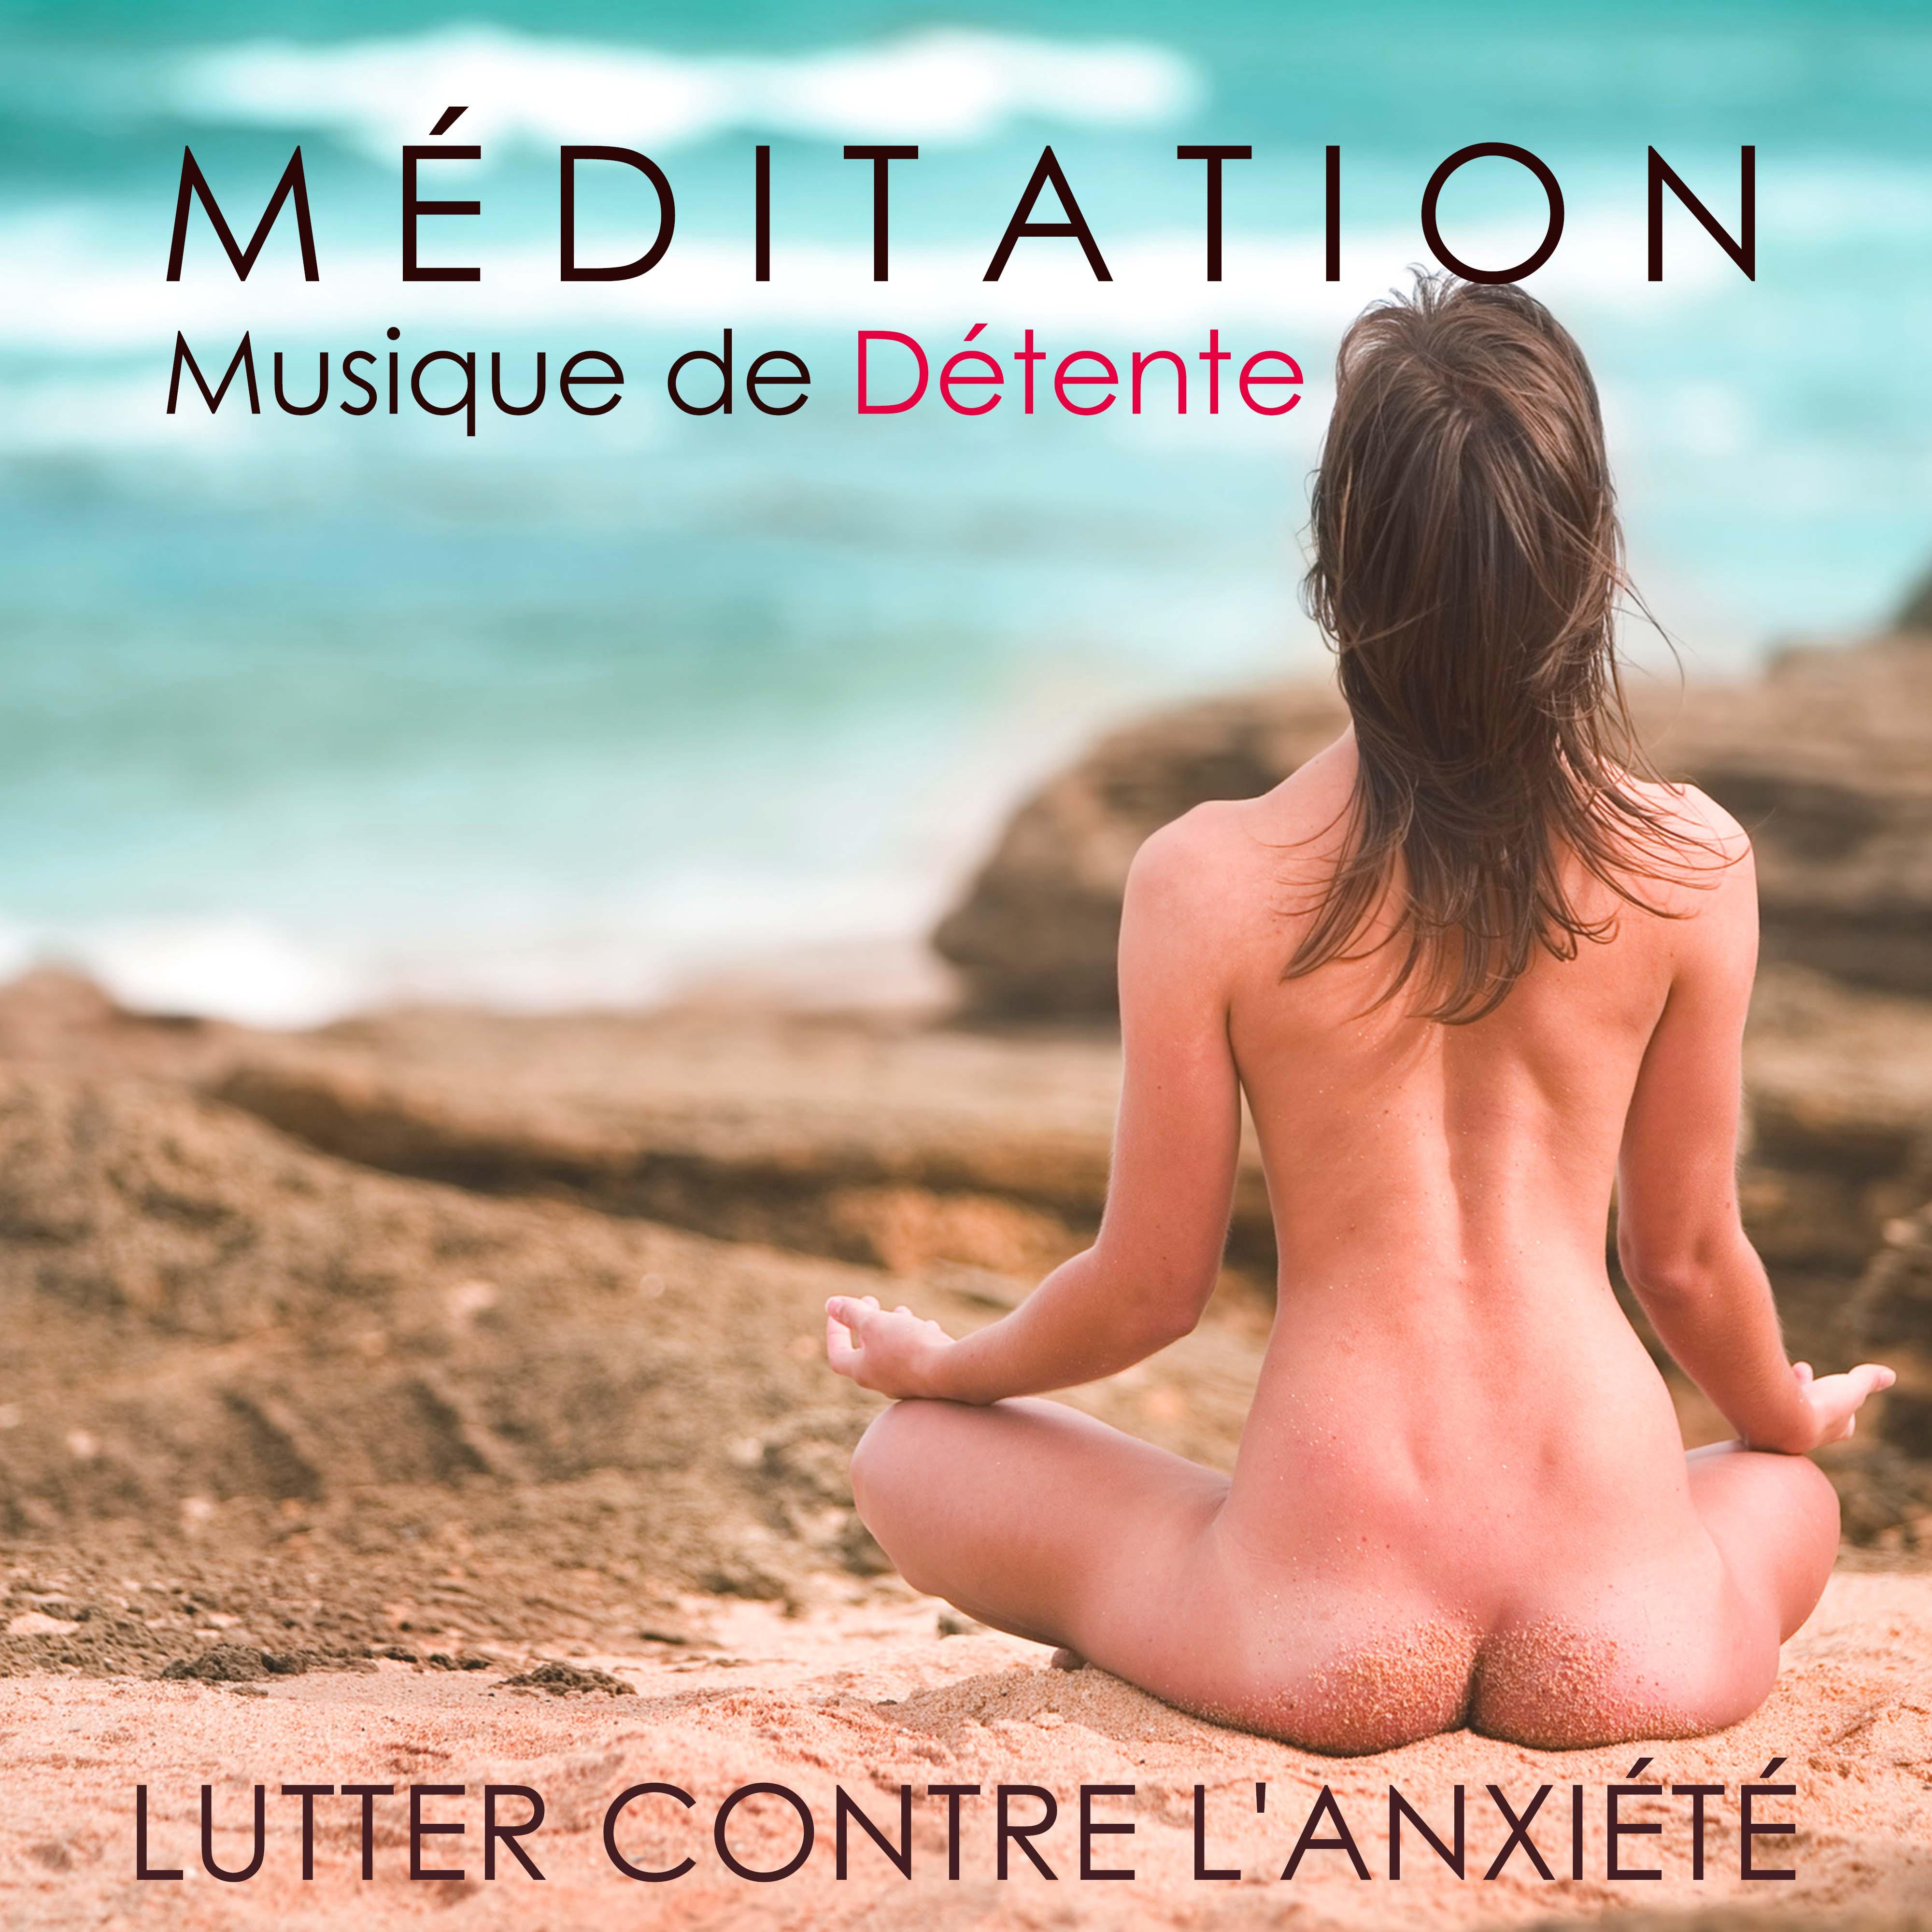 Inspiring Music - Flute & Piano Music, Music and Pure Nature Sounds for Stress Relief, Time to Chill Out, Slow Music for Yoga